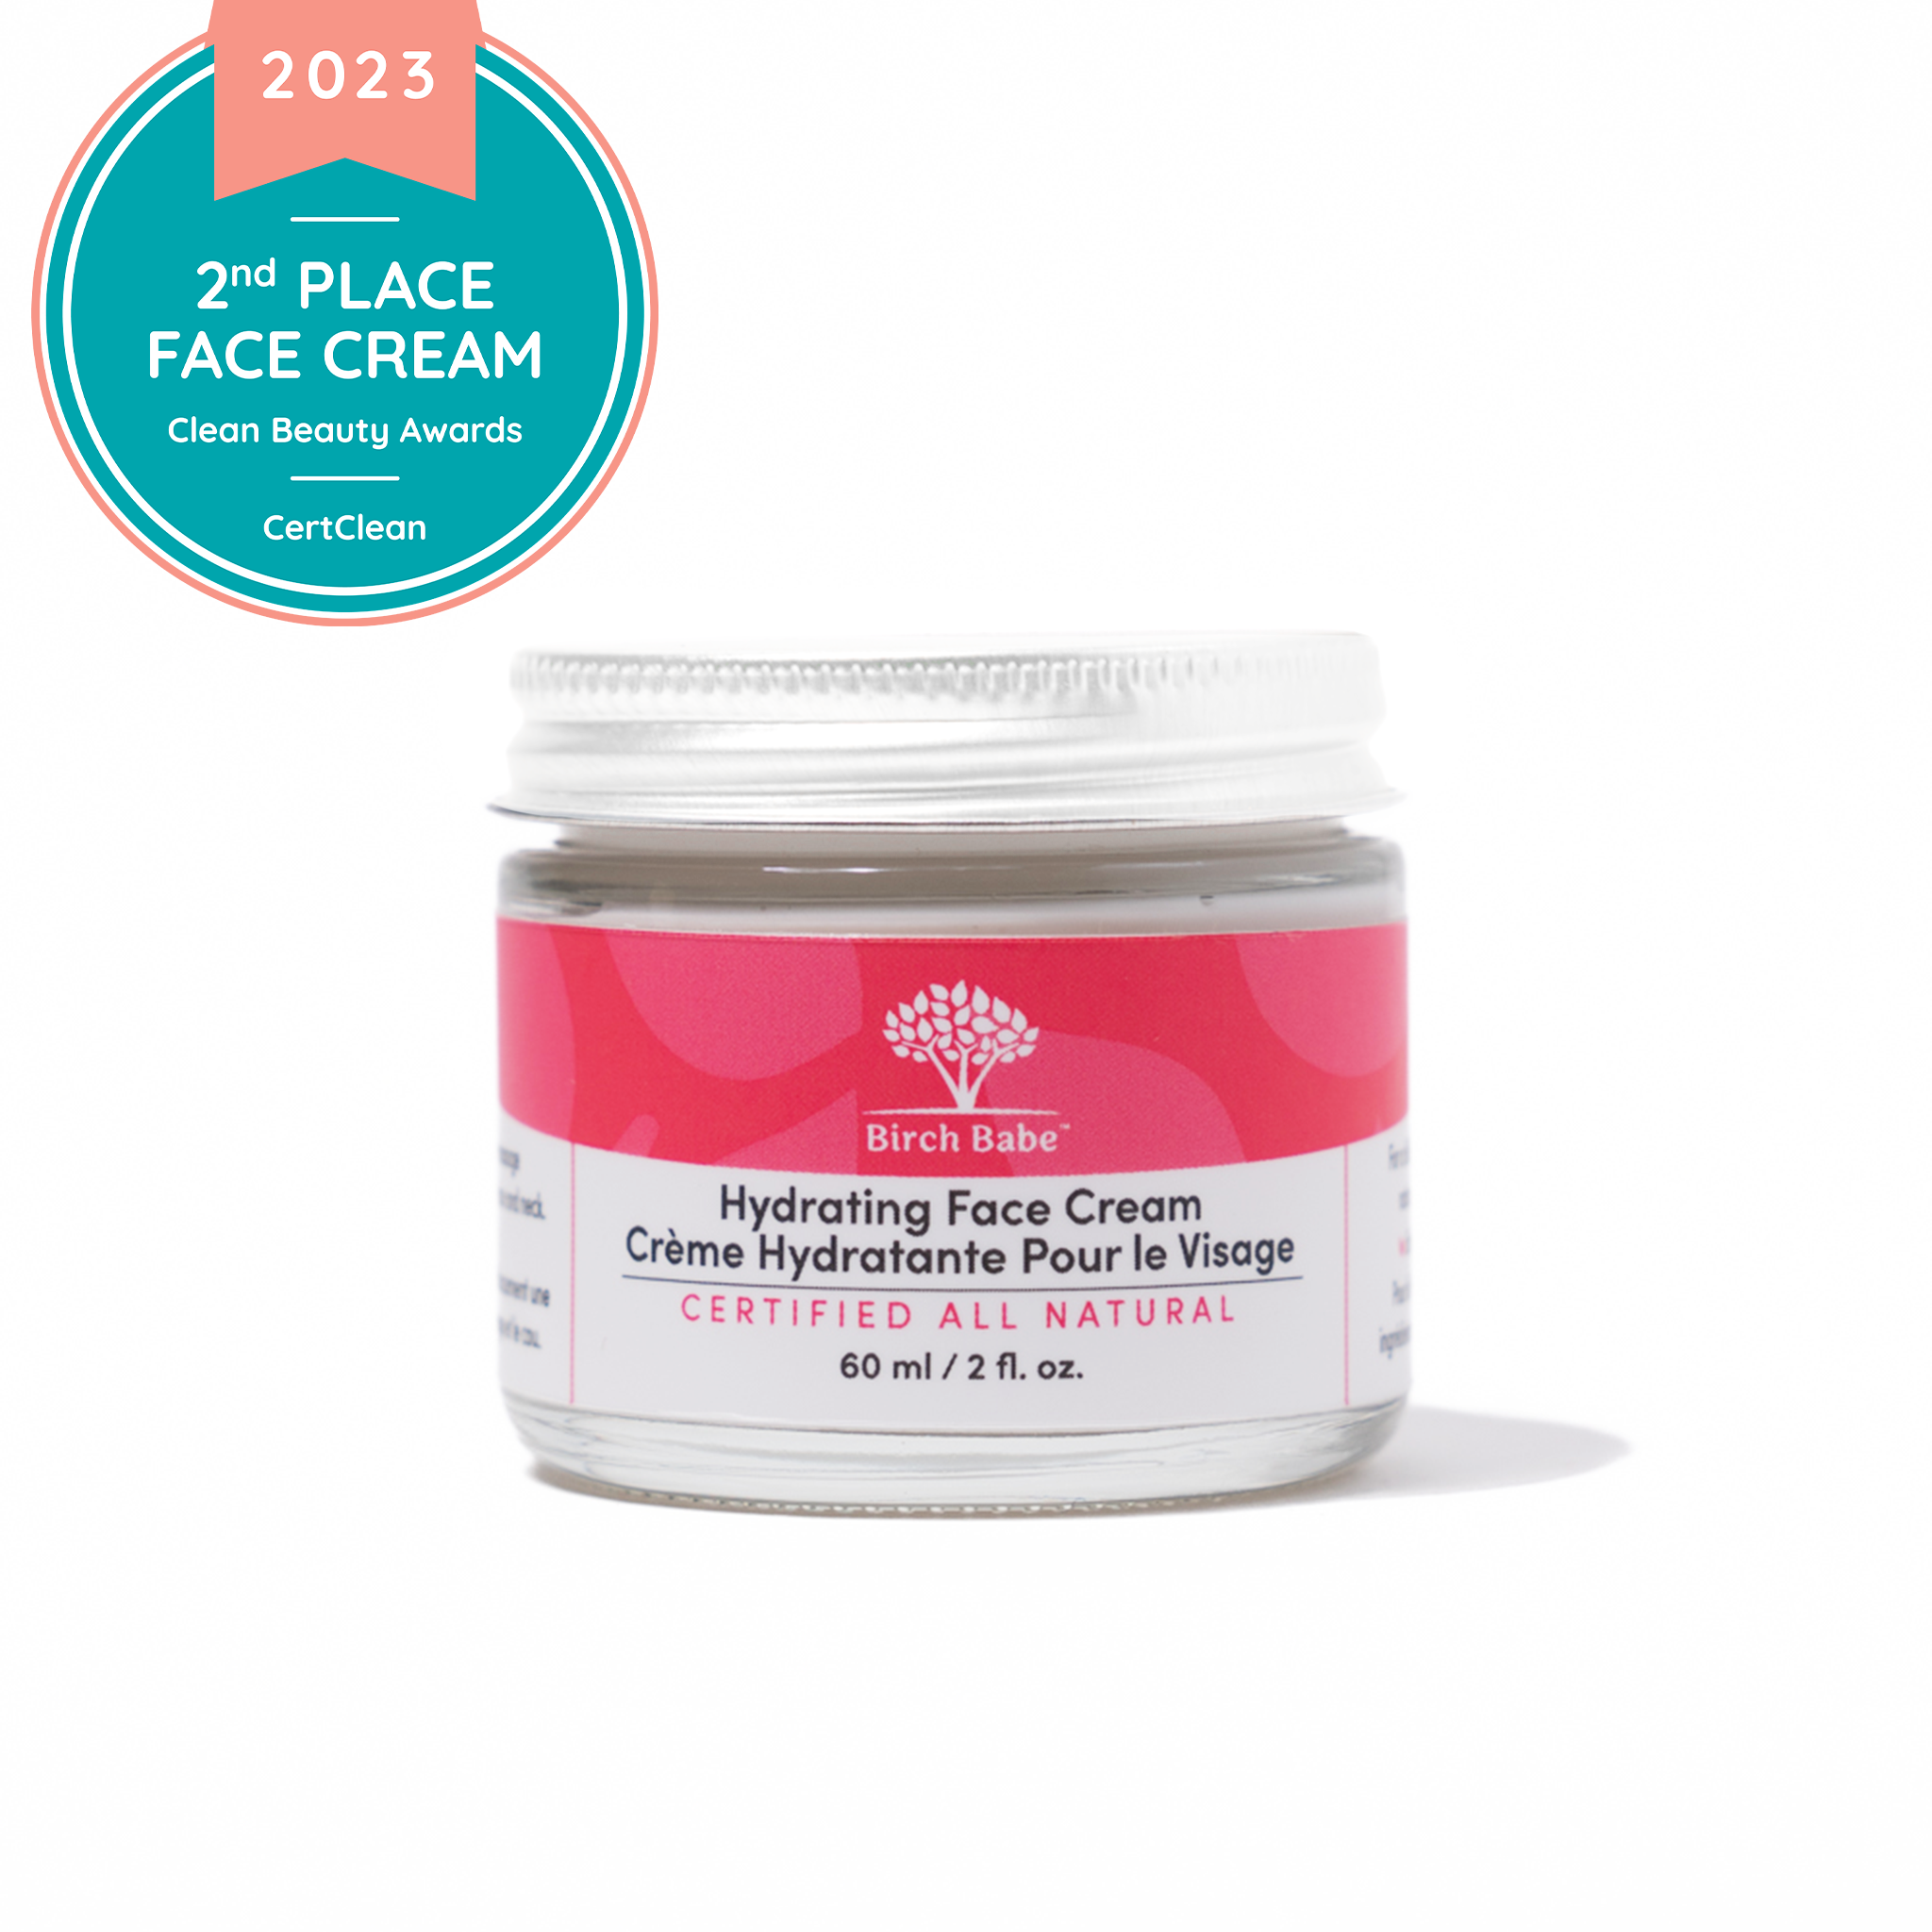 chemist approved and perfect for normal to oily and sensitive skin this canadian made face cream will help with redness and breakouts while soothing and calming skin